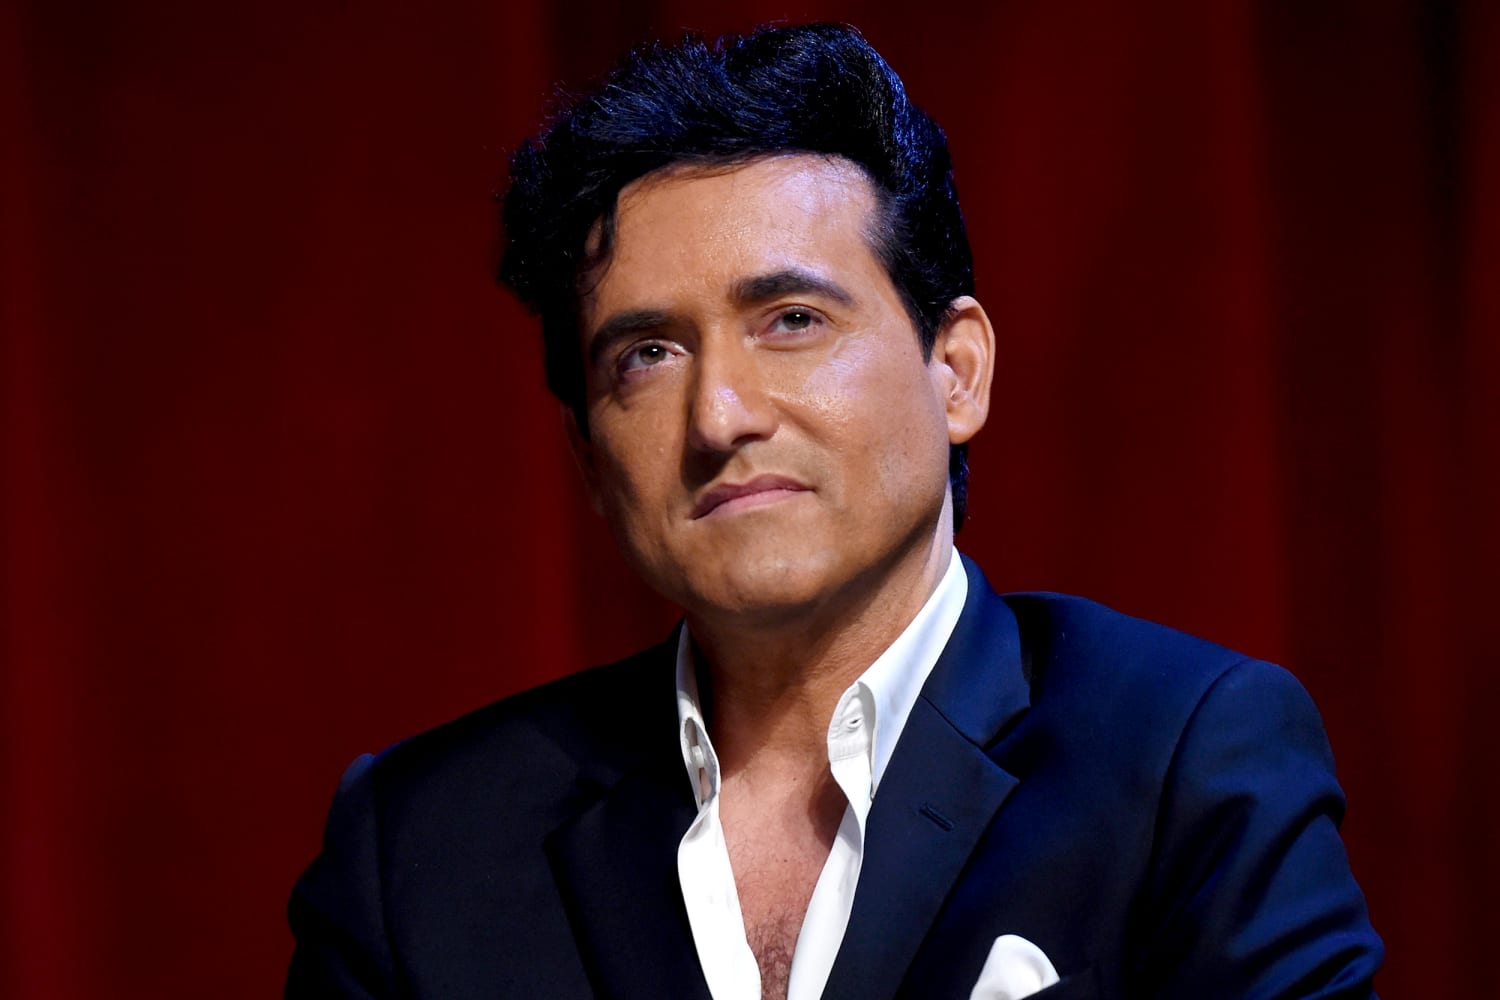 Il Divo singer Carlos Marín dies at 53 after being hospitalized